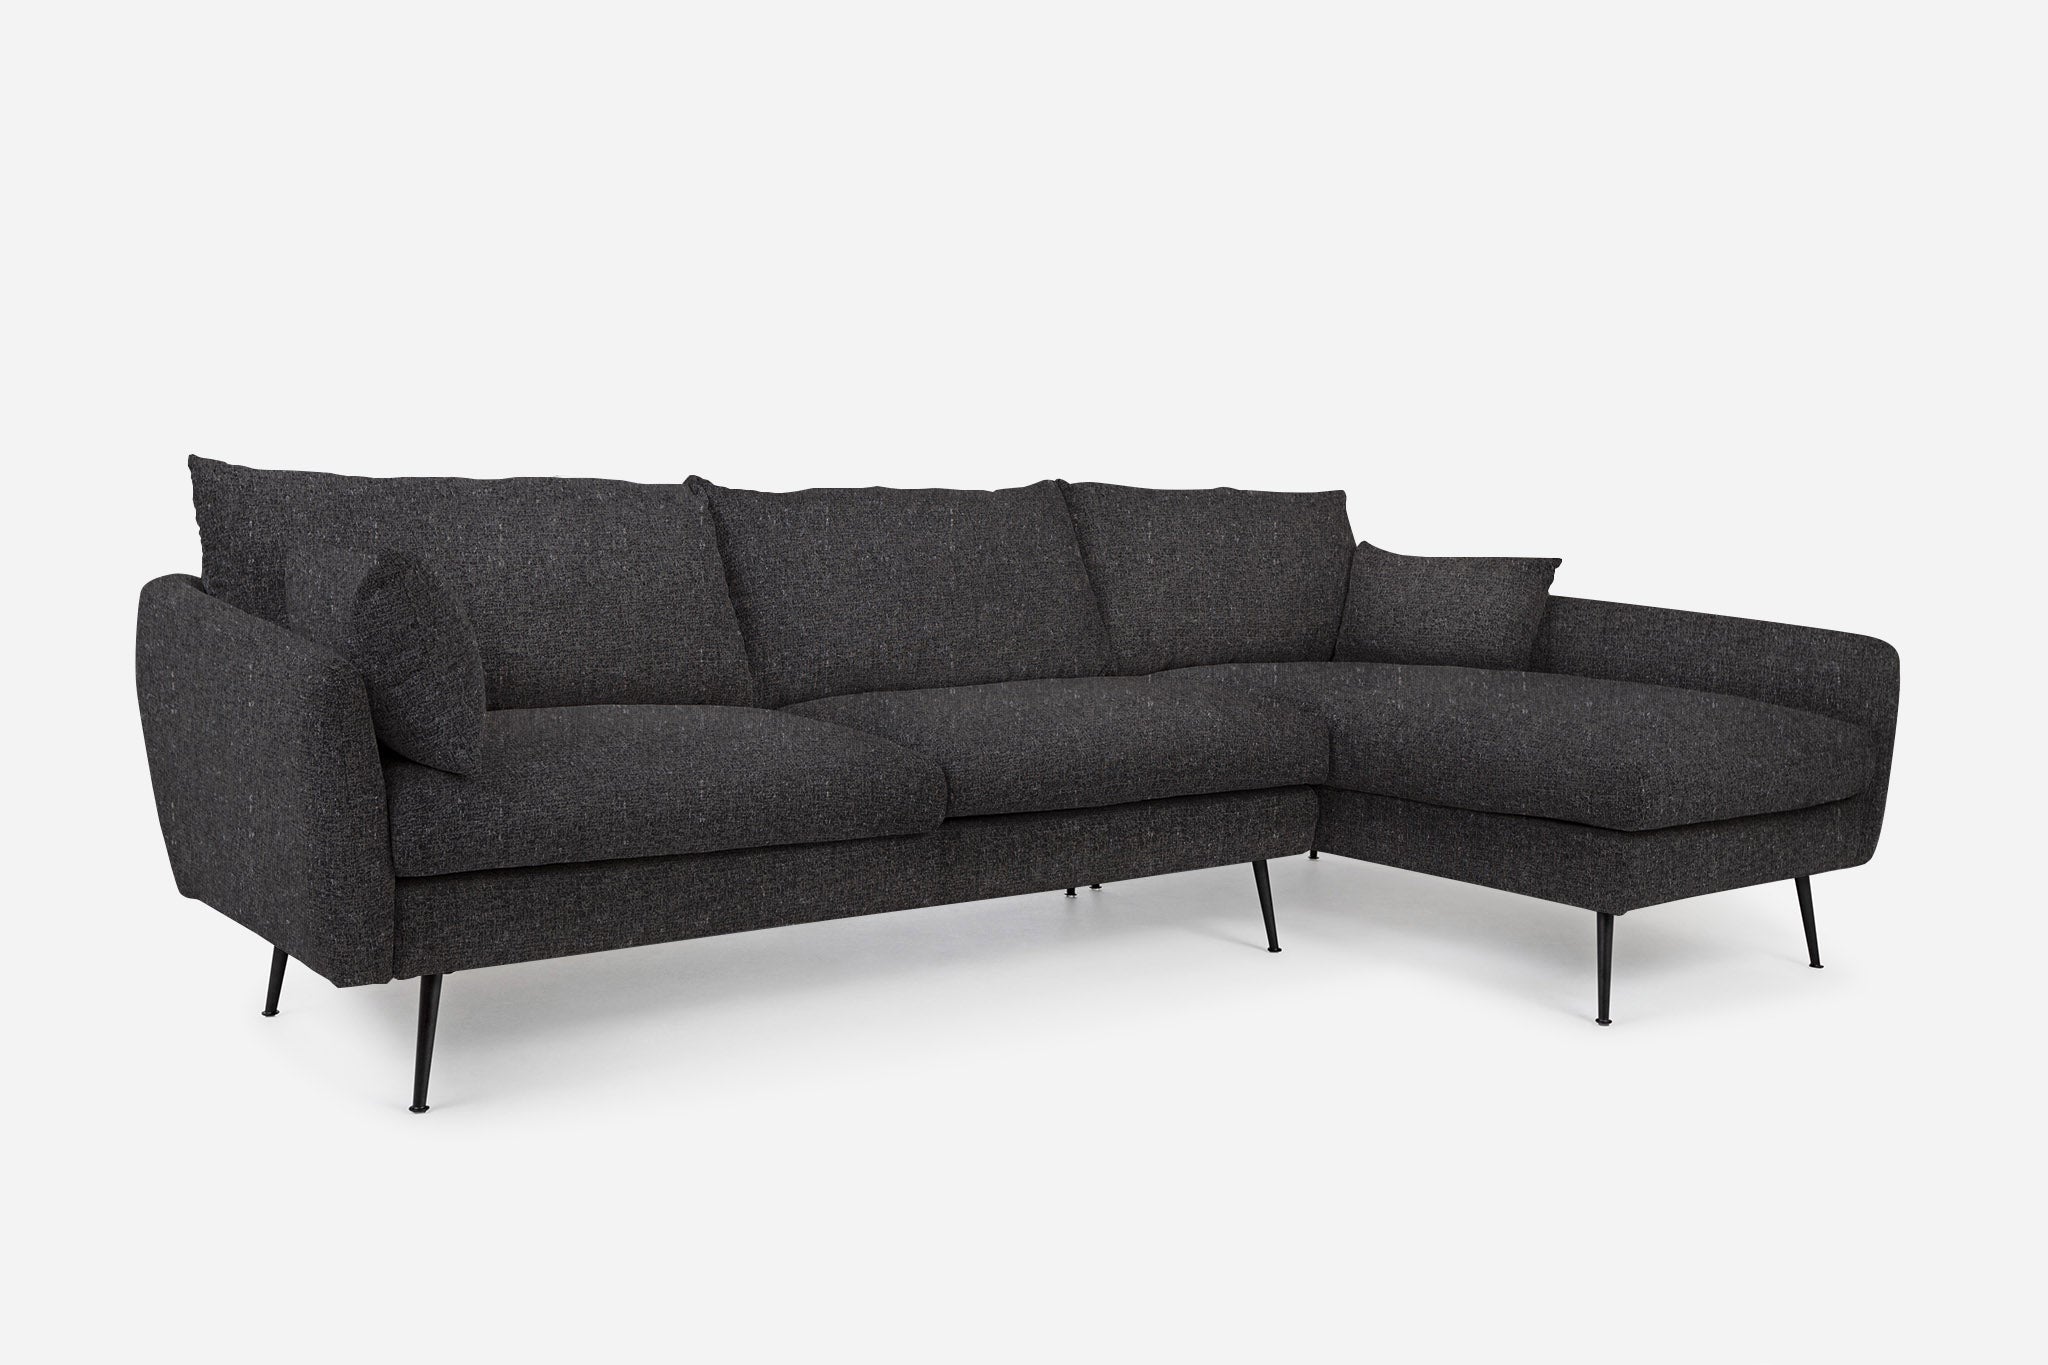 park sectional sofa shown in charcoal with black legs right facing